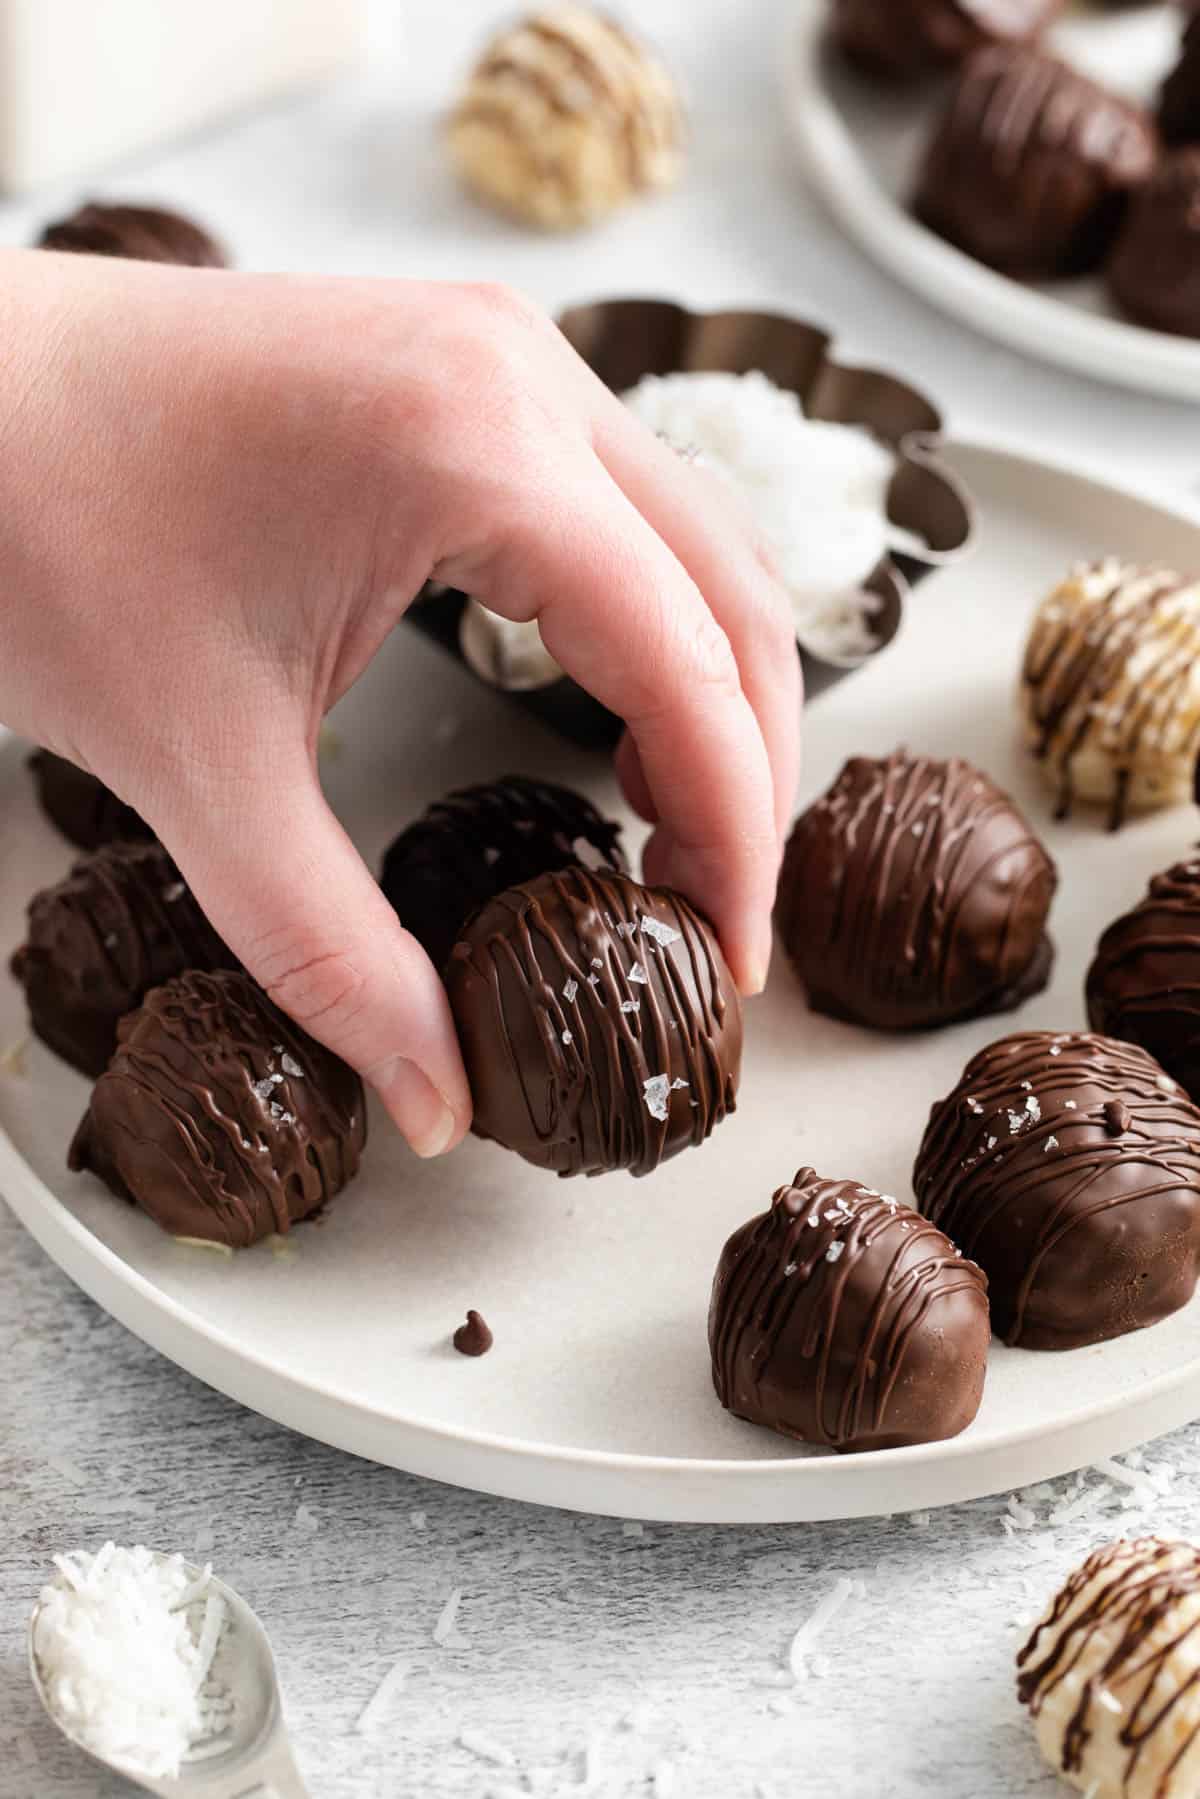 A hand picking up a chocolate coconut ball from a plate.